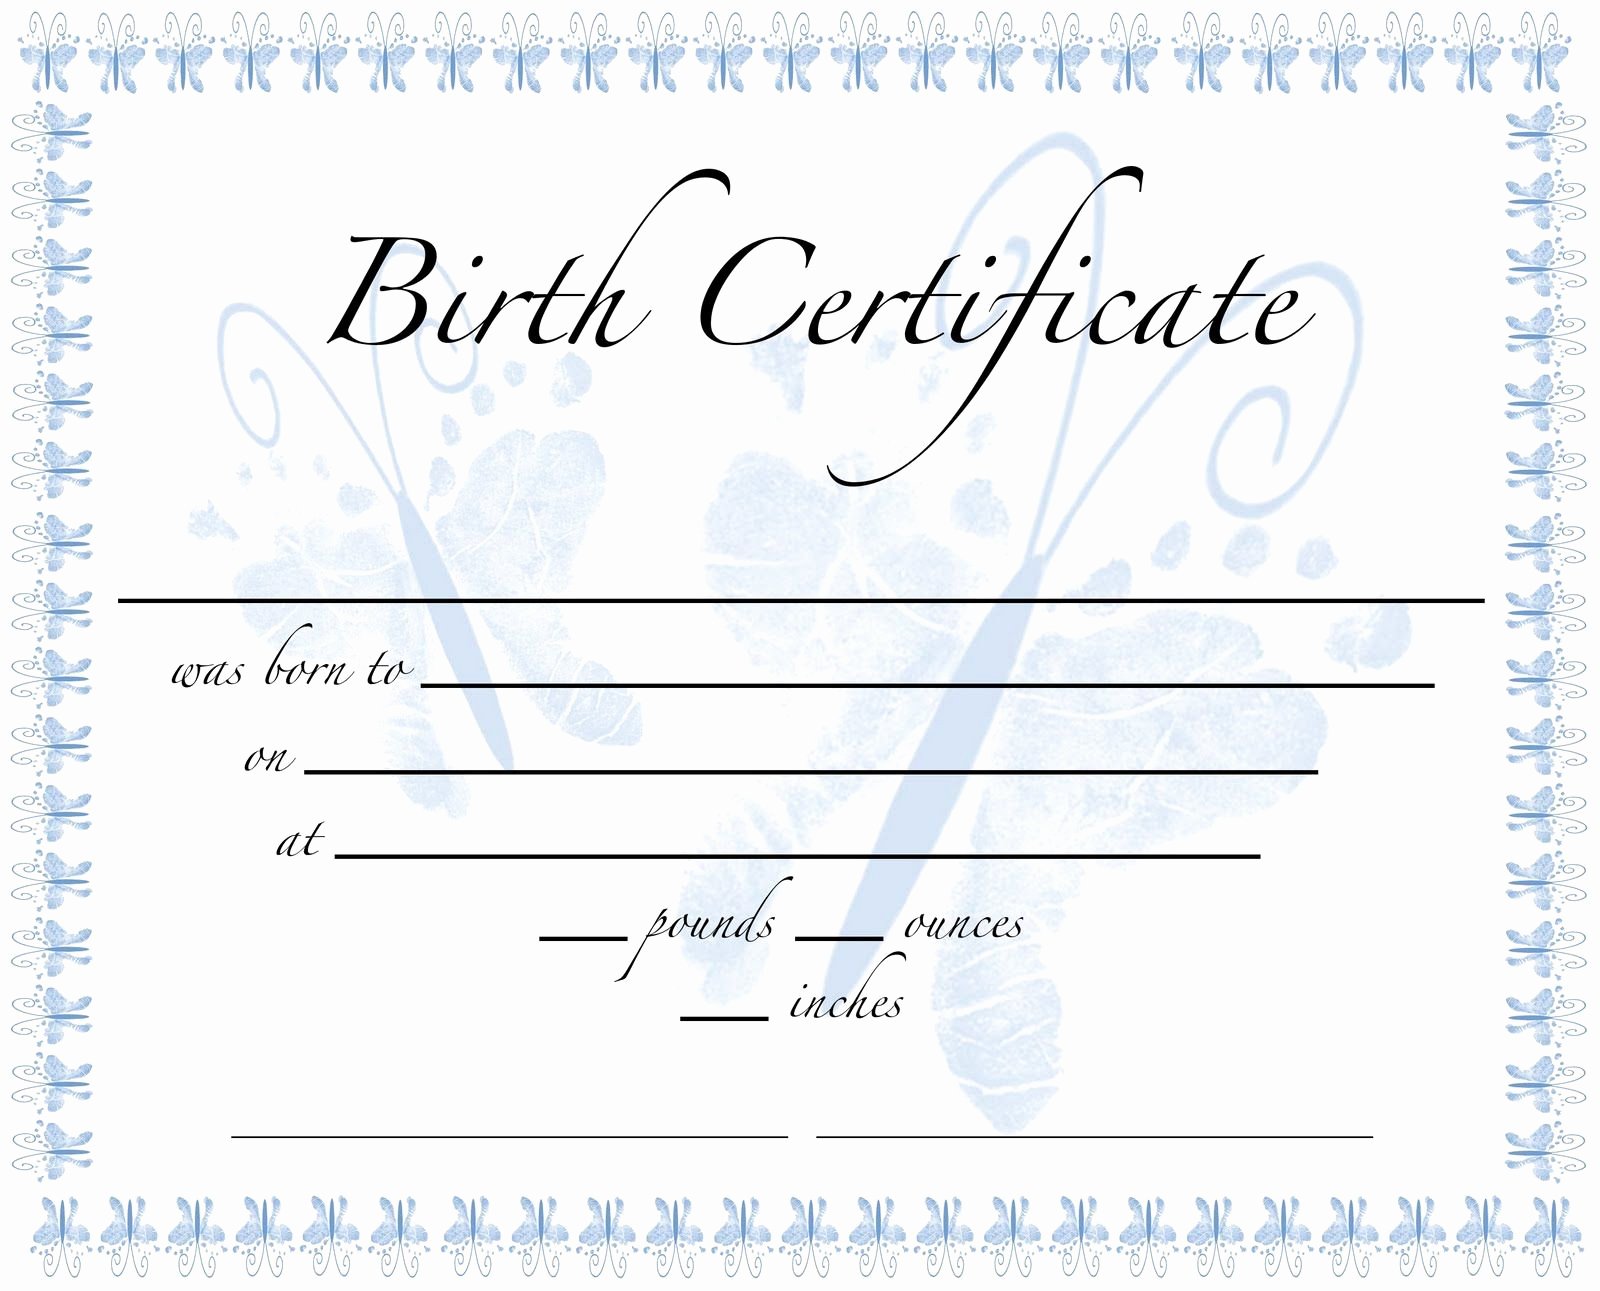 Fake Birth Certificate Template Free Inspirational Pics for Birth Certificate Template for School Project